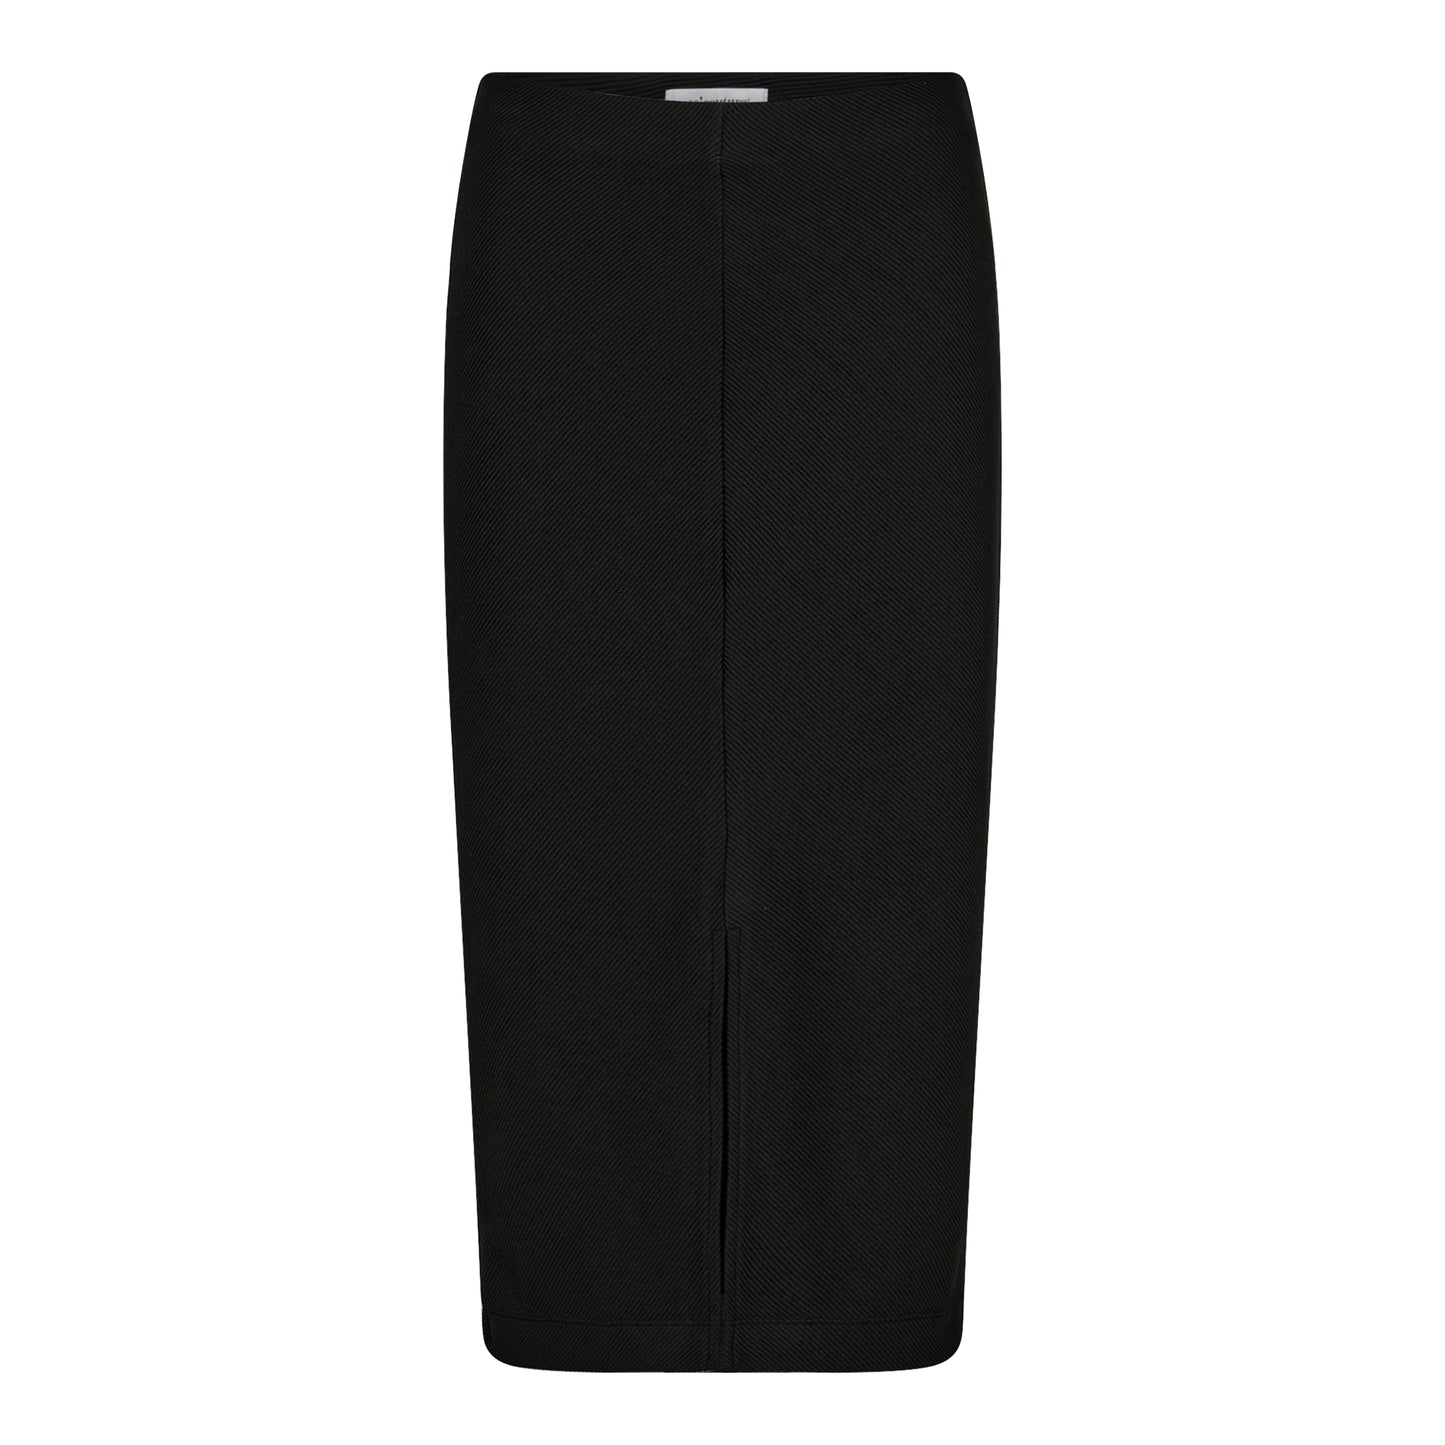 Cocouture - PicaCC Pencil Skirt - Sort